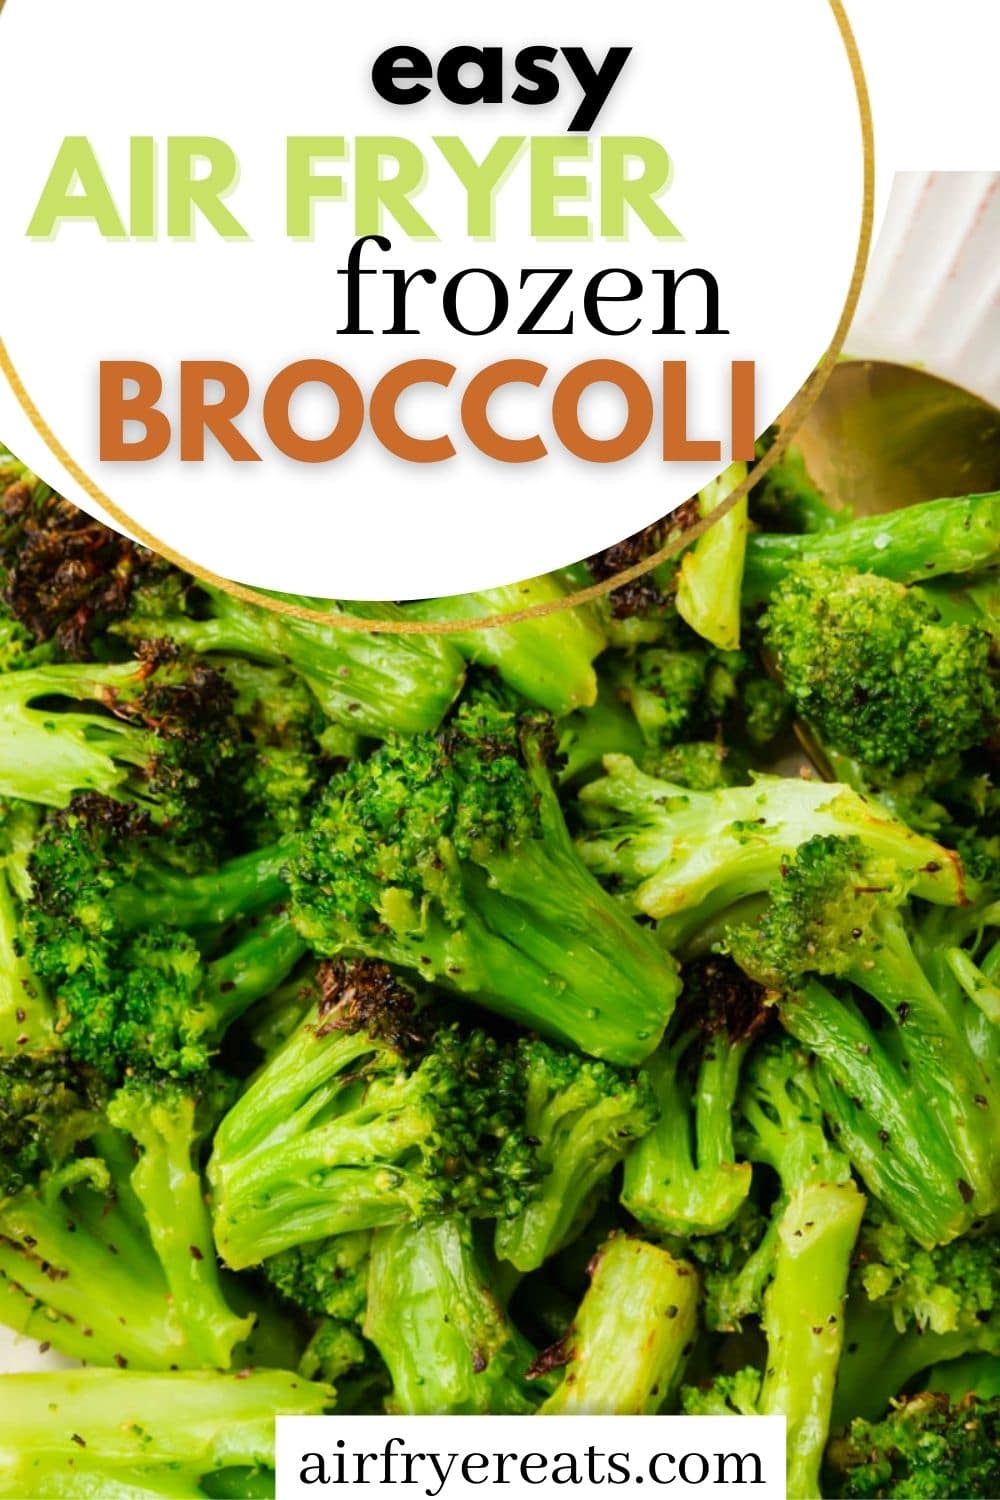 image of air fryer frozen broccoli with text overlay